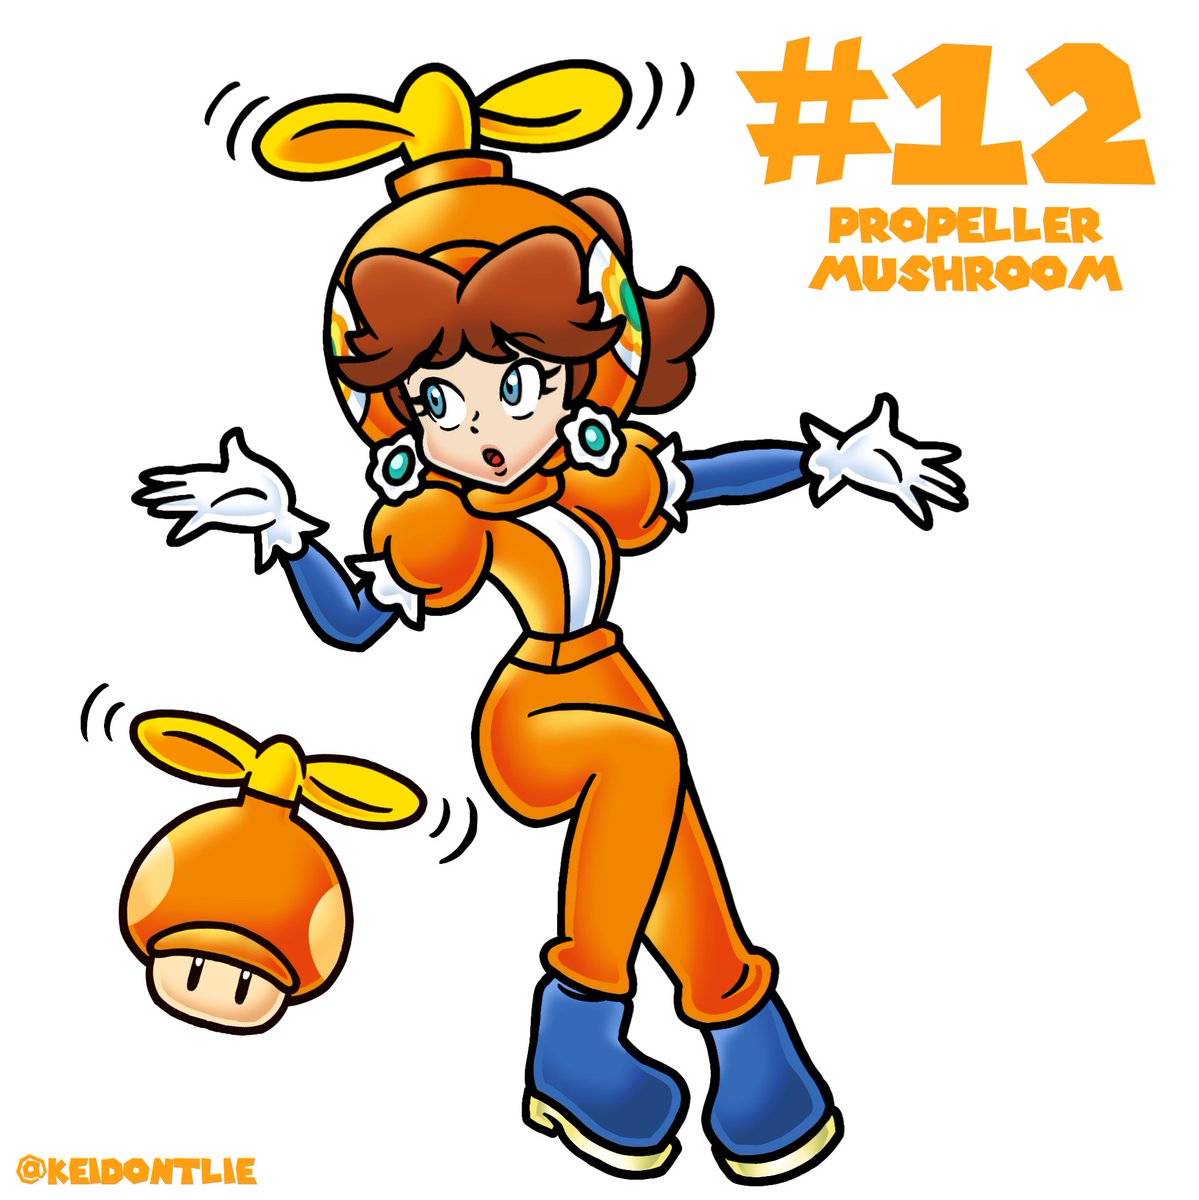 3 mushroom in a row! The Propeller mushroom is kinda special to me since SMBWii was one of my first Mario games I ever played. 🚁🌼 Transforms Daisy into Propeller Daisy. #PrincessDaisy #SuperMario #MarioBros #Fanart #PowerUpDaisy